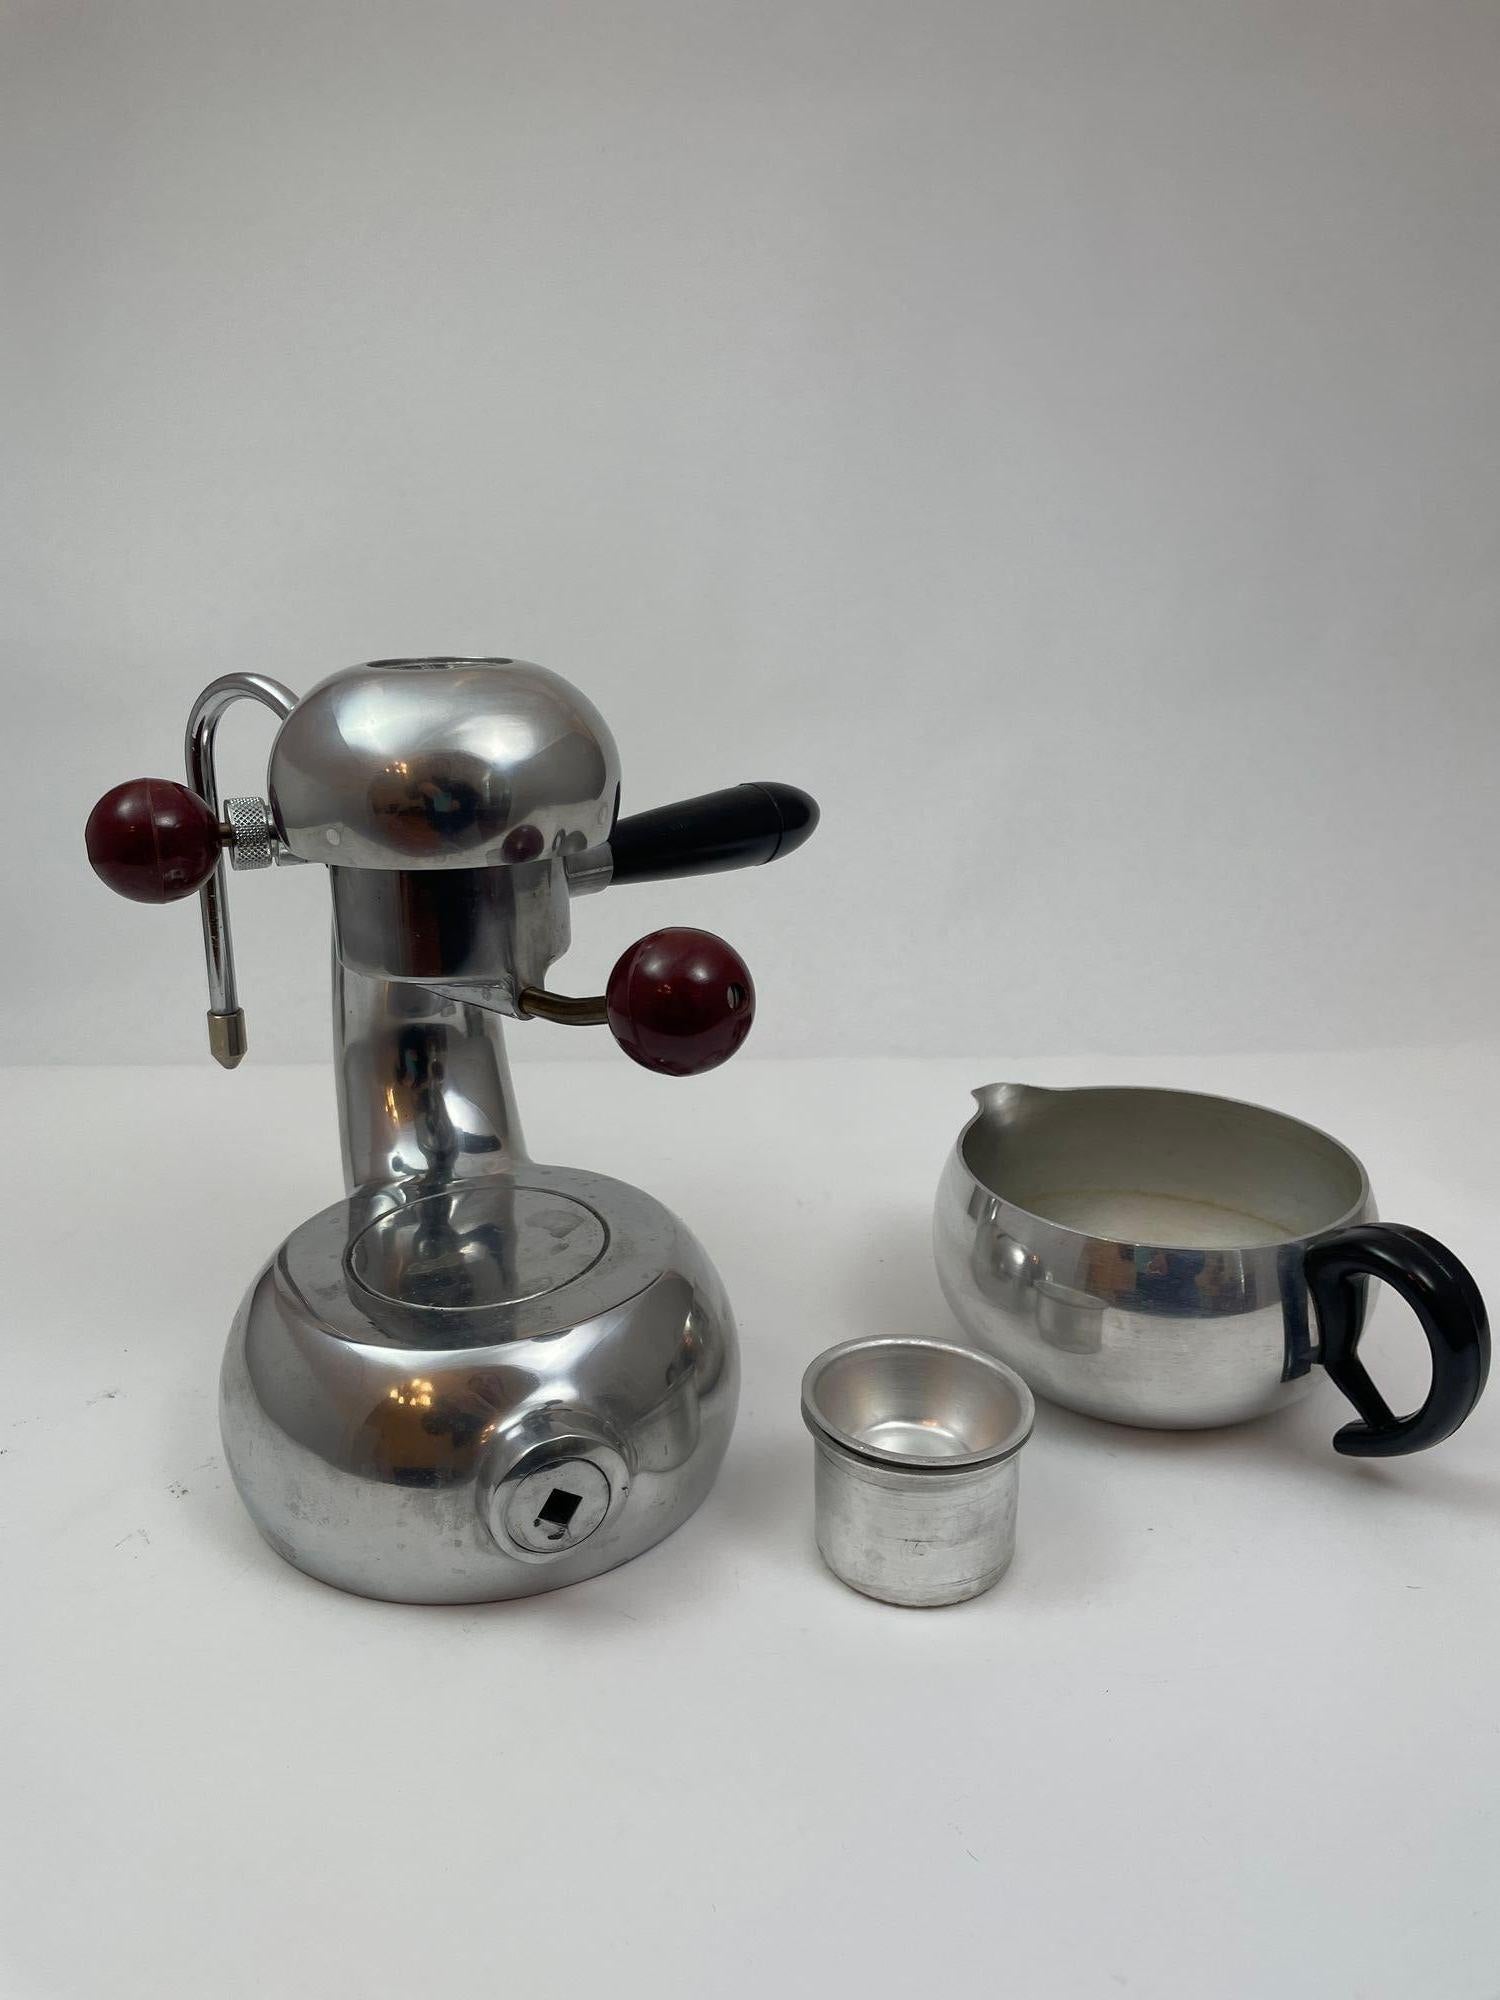 Vintage Atomic Coffee Maker by Giordano Robbiati Italy 1950s In Good Condition For Sale In North Hollywood, CA